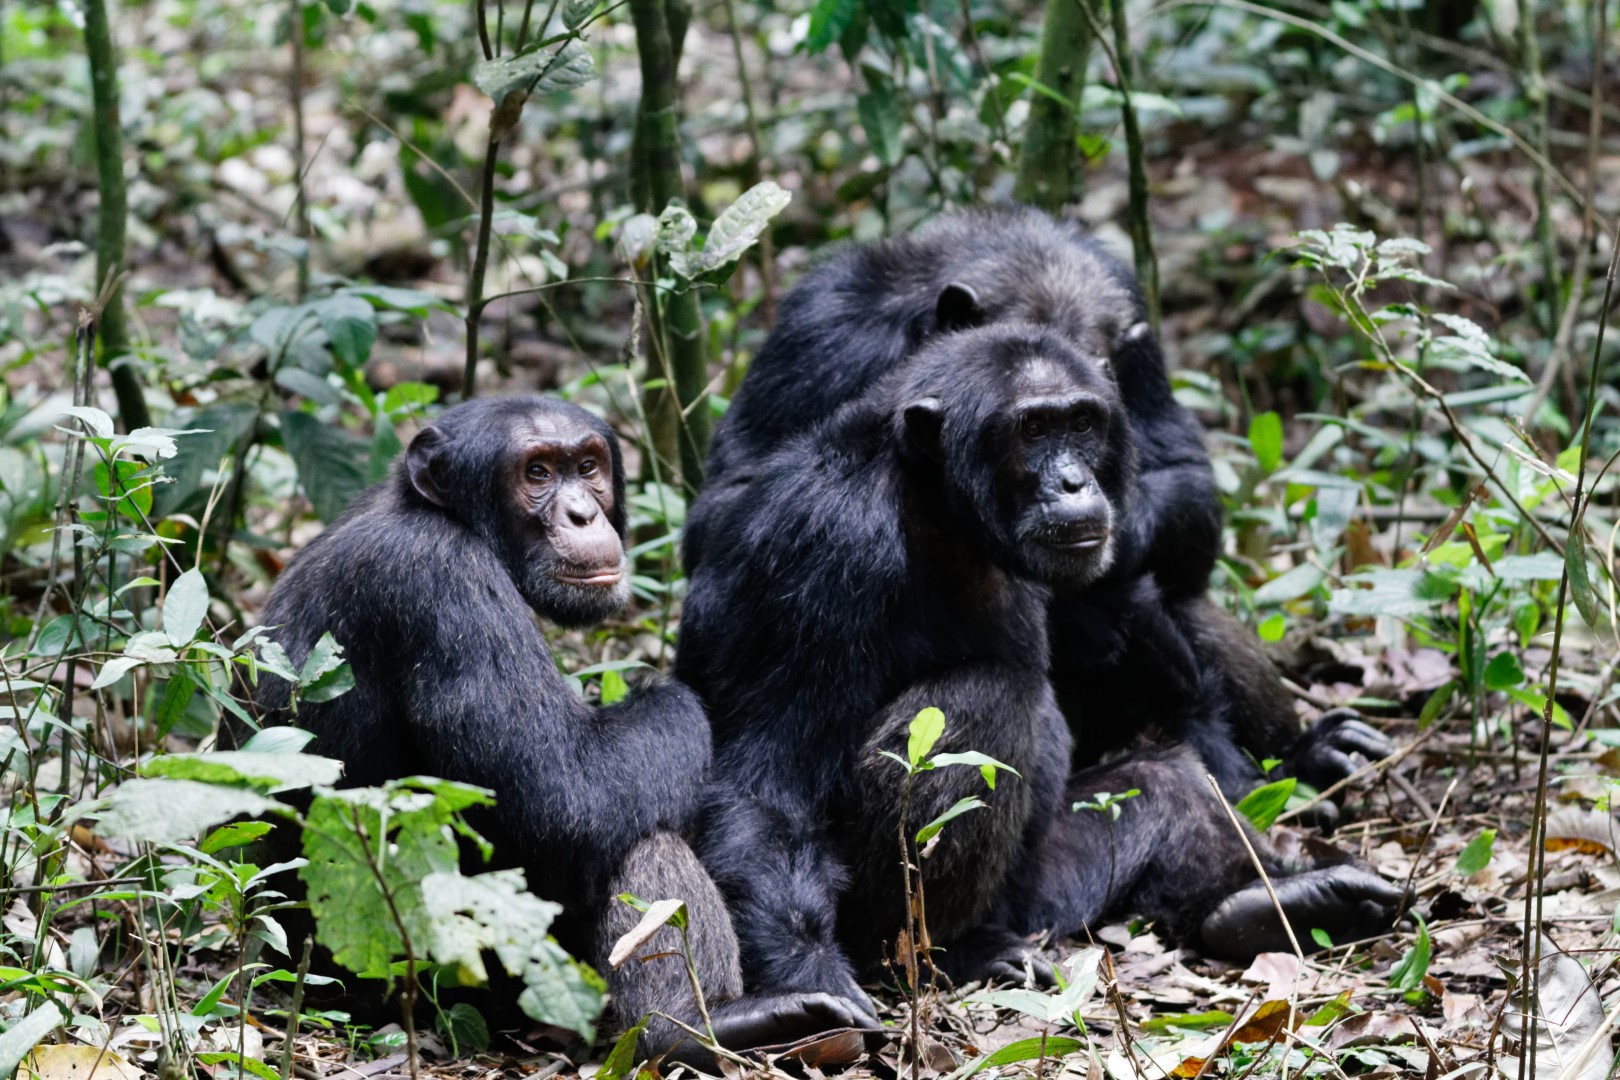 A family of habituated chimpanzees in Kibale National Park